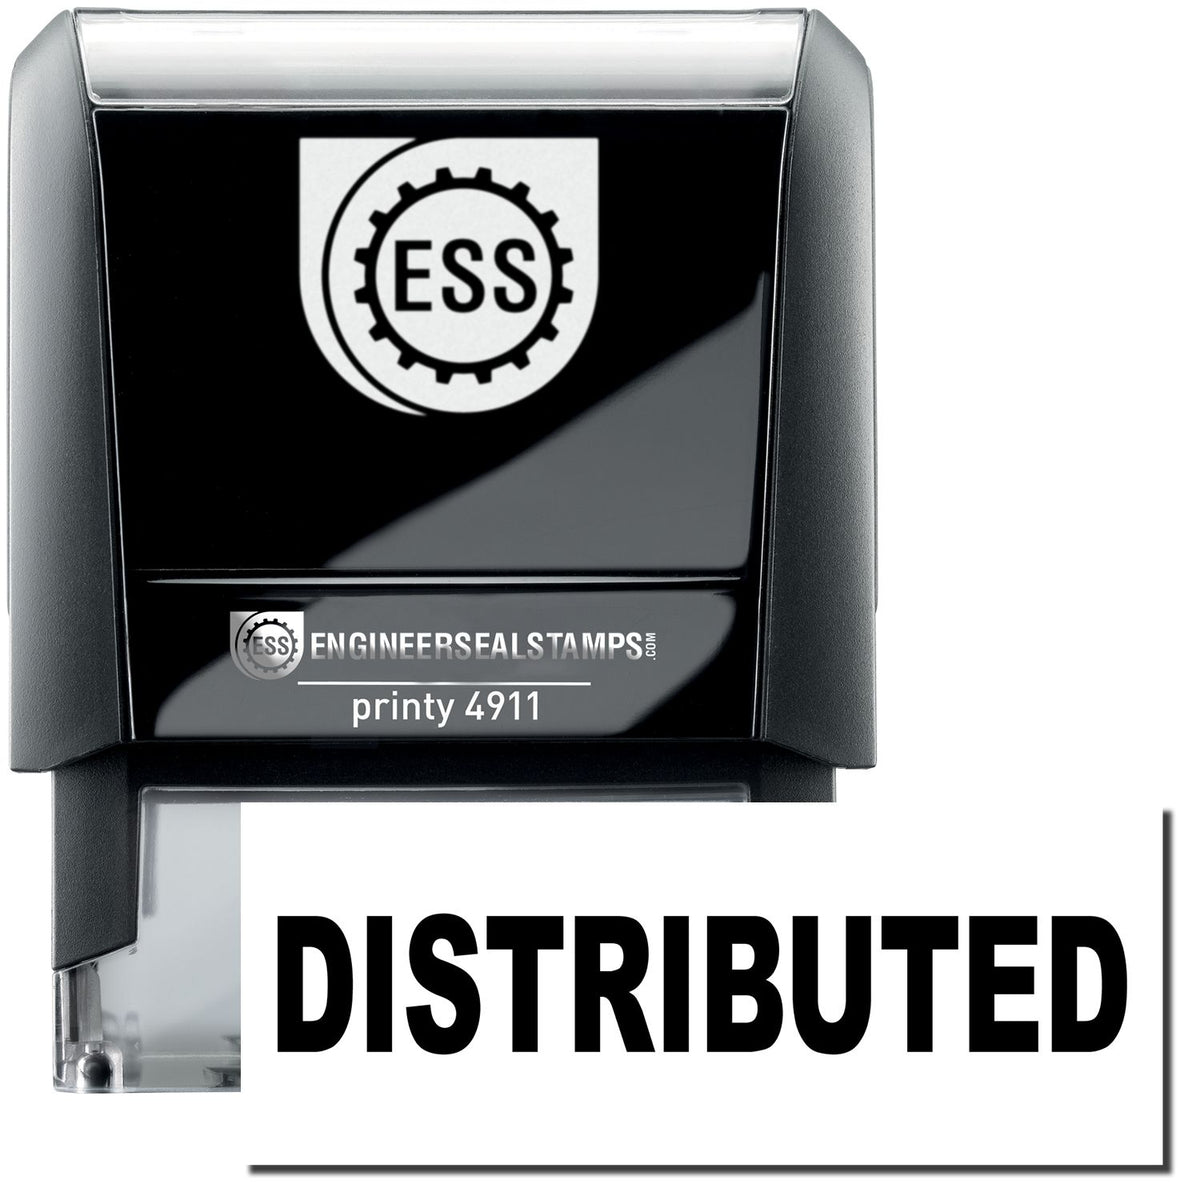 A self-inking stamp with a stamped image showing how the text &quot;DISTRIBUTED&quot; is displayed after stamping.